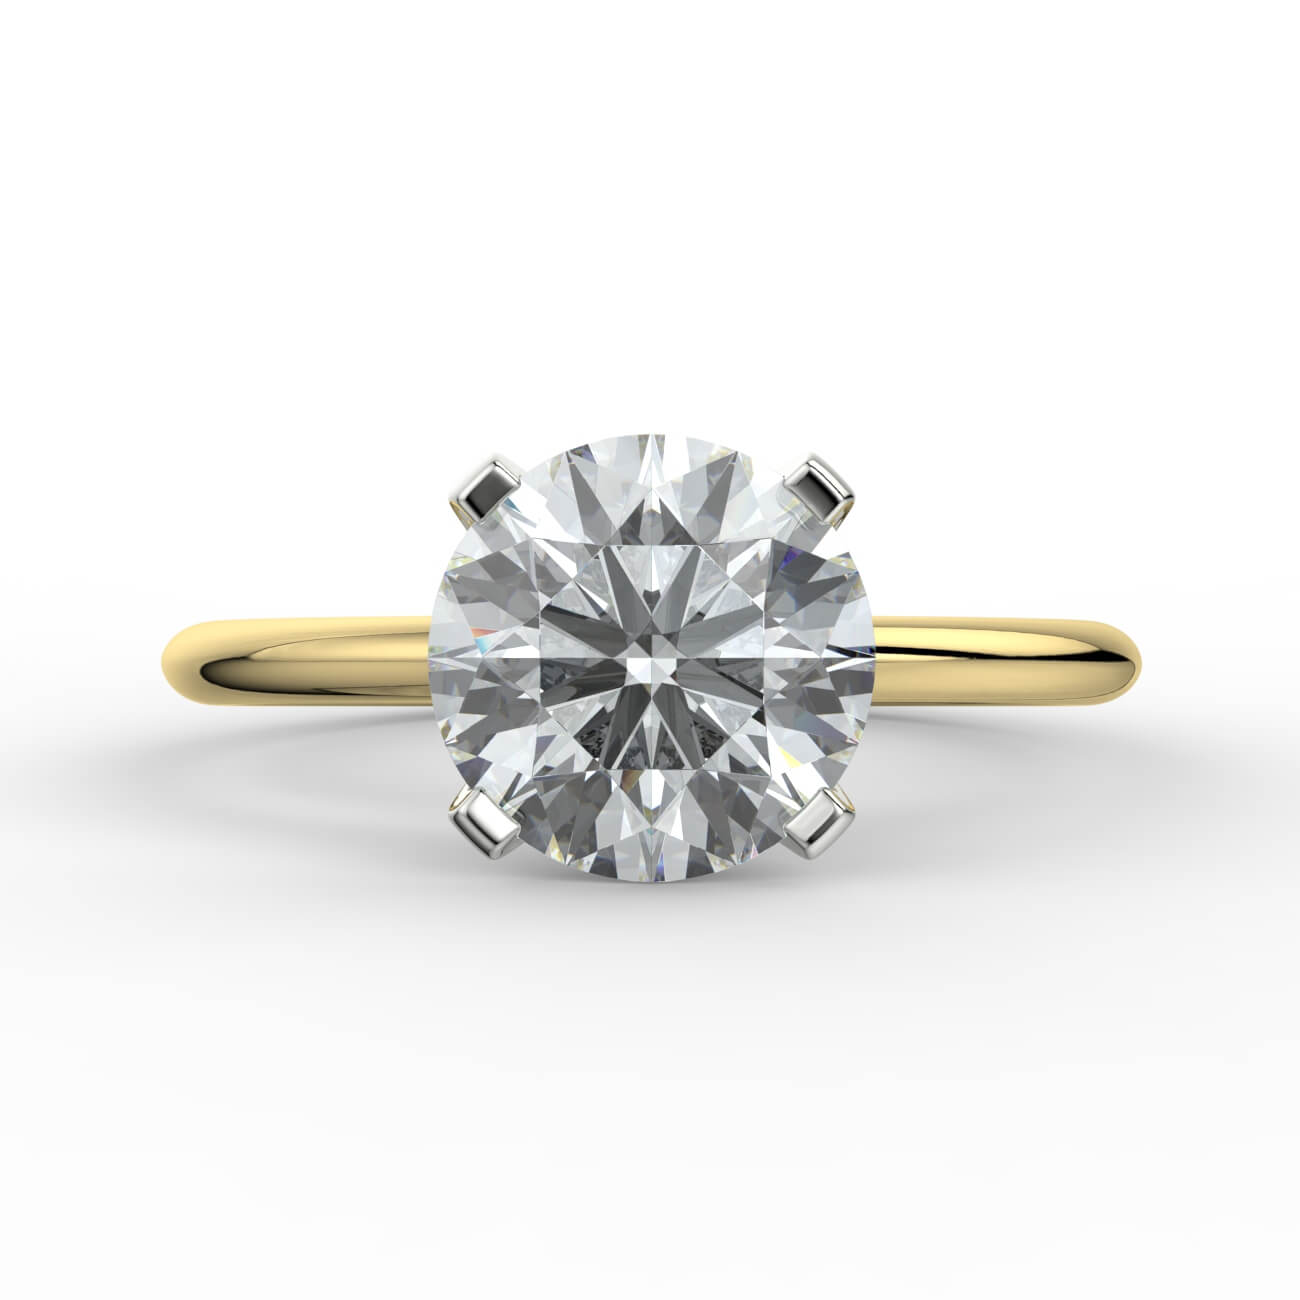 Knife-edge solitaire diamond engagement ring in yellow and white gold – Australian Diamond Network